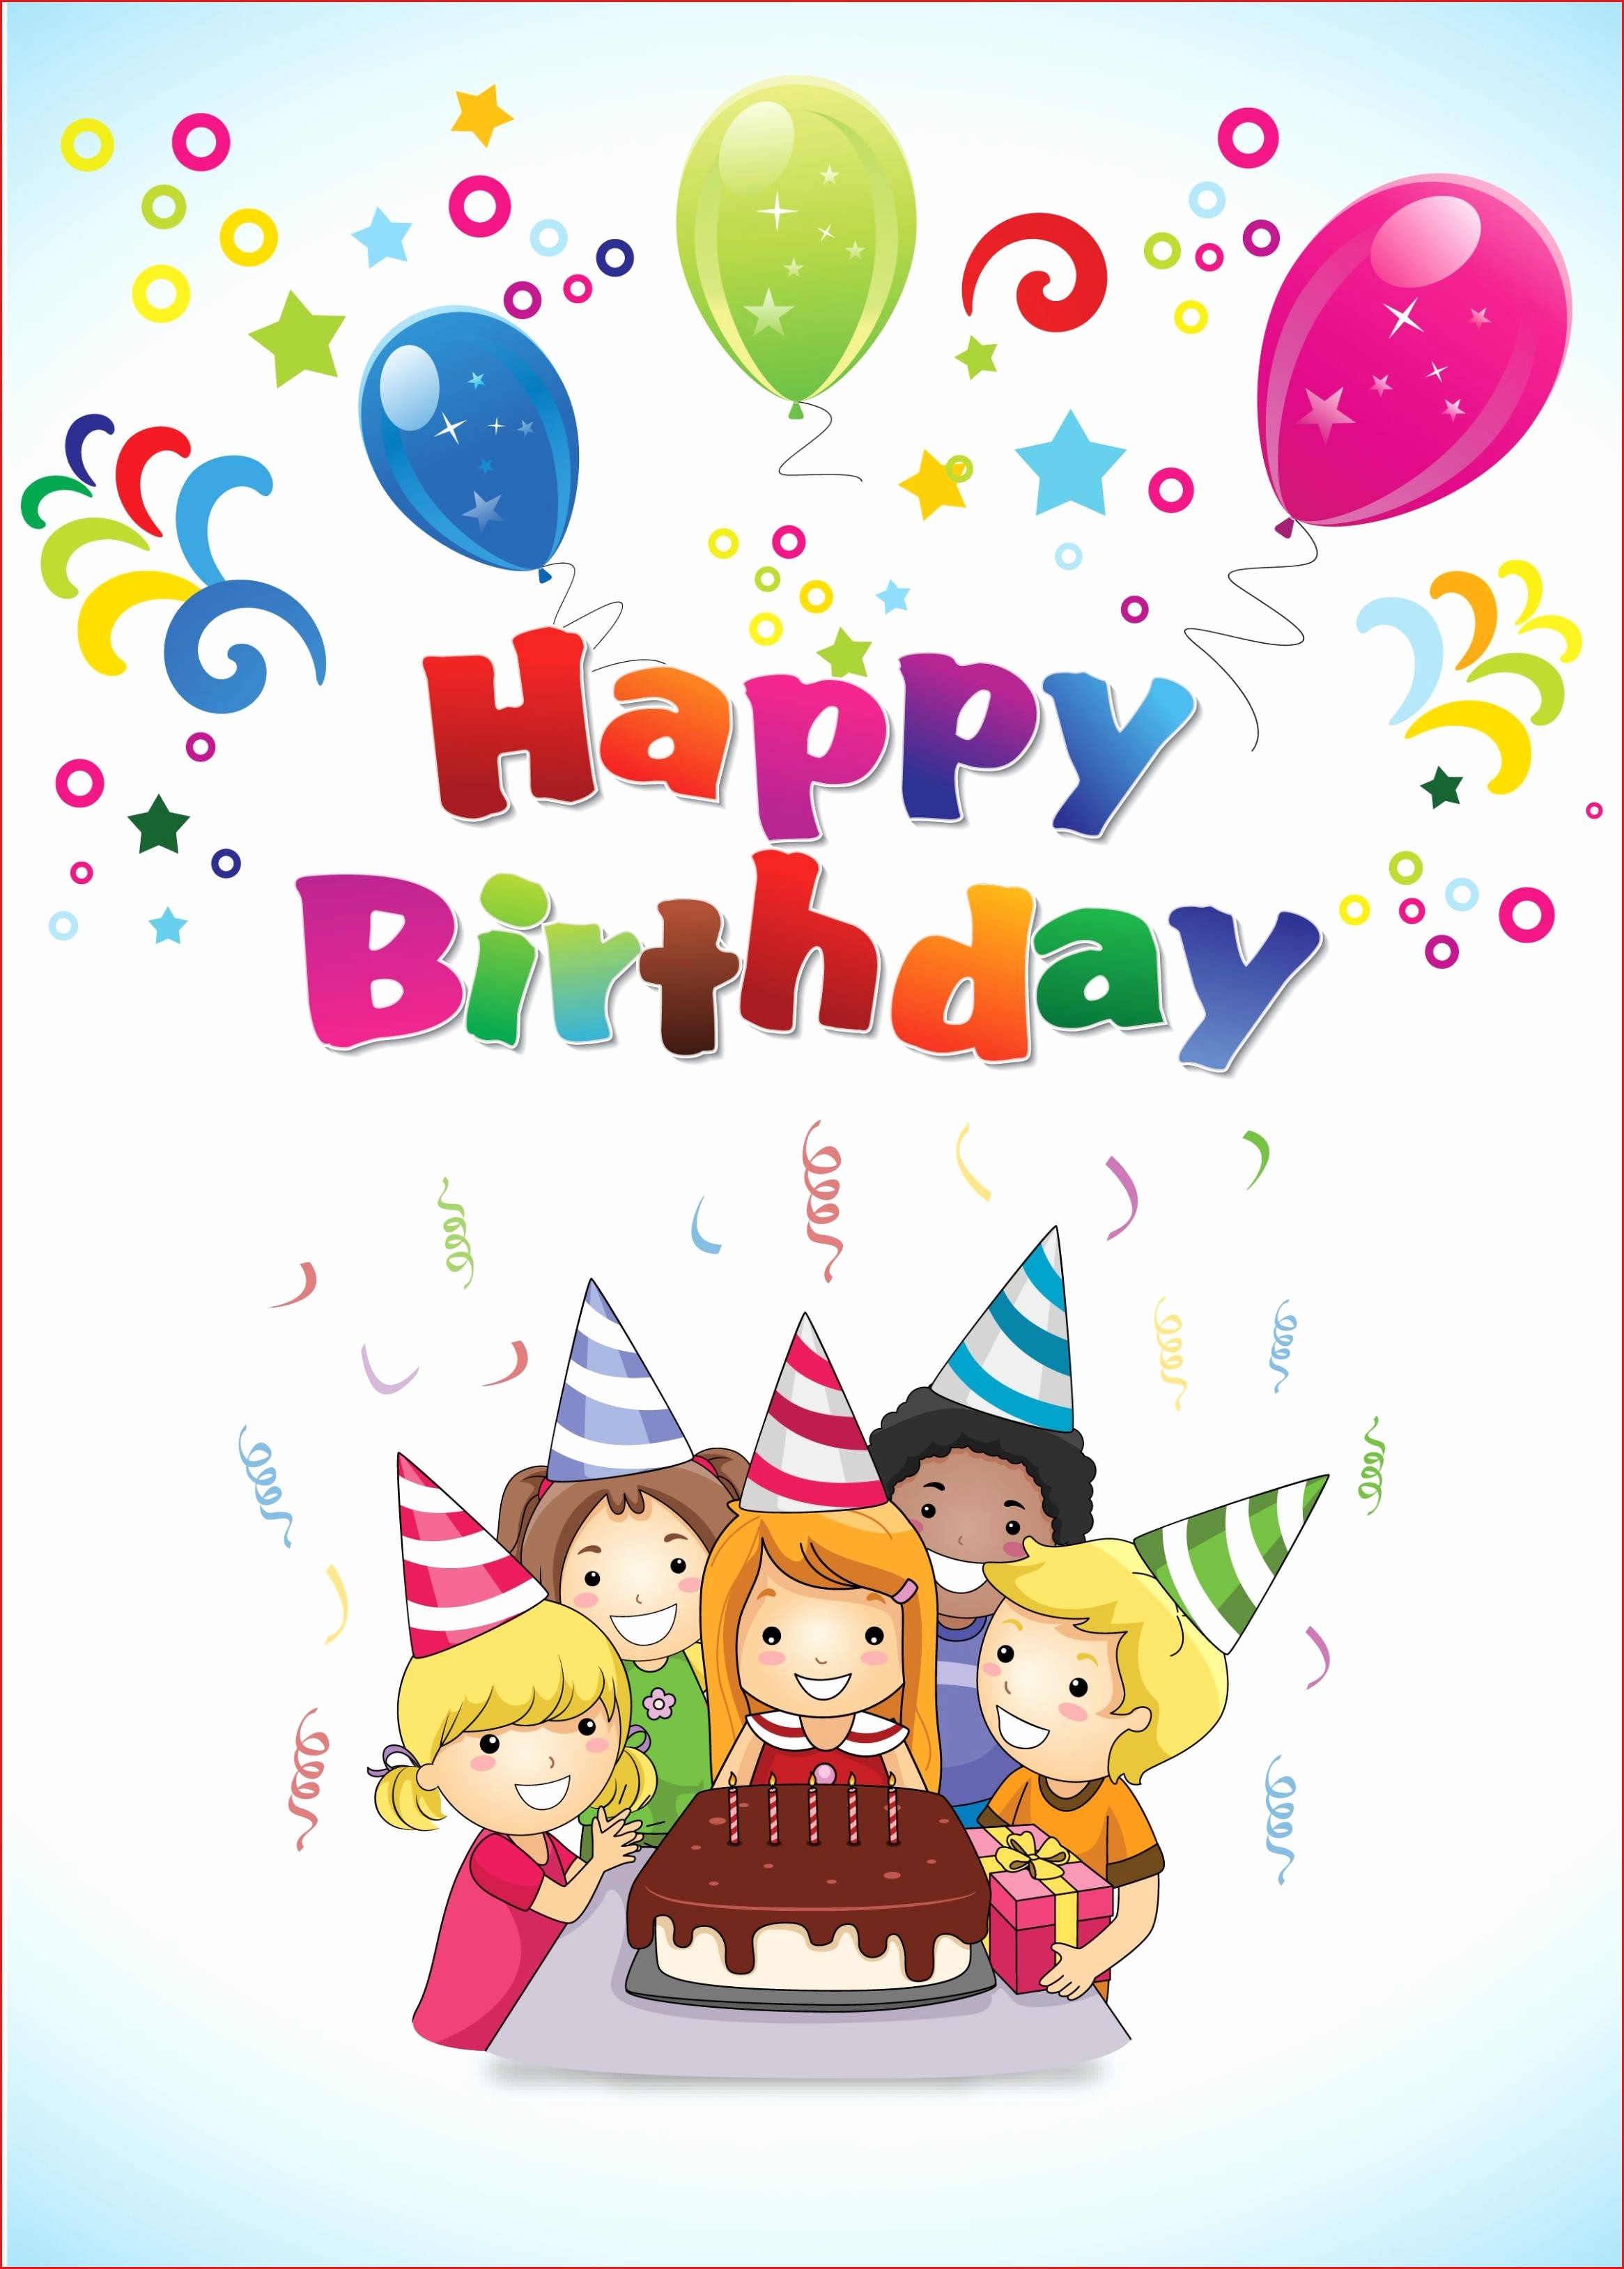 98+ Birthday Card Creator Online Free - Marvelous Greeting Card - Make Your Own Printable Birthday Cards Online Free